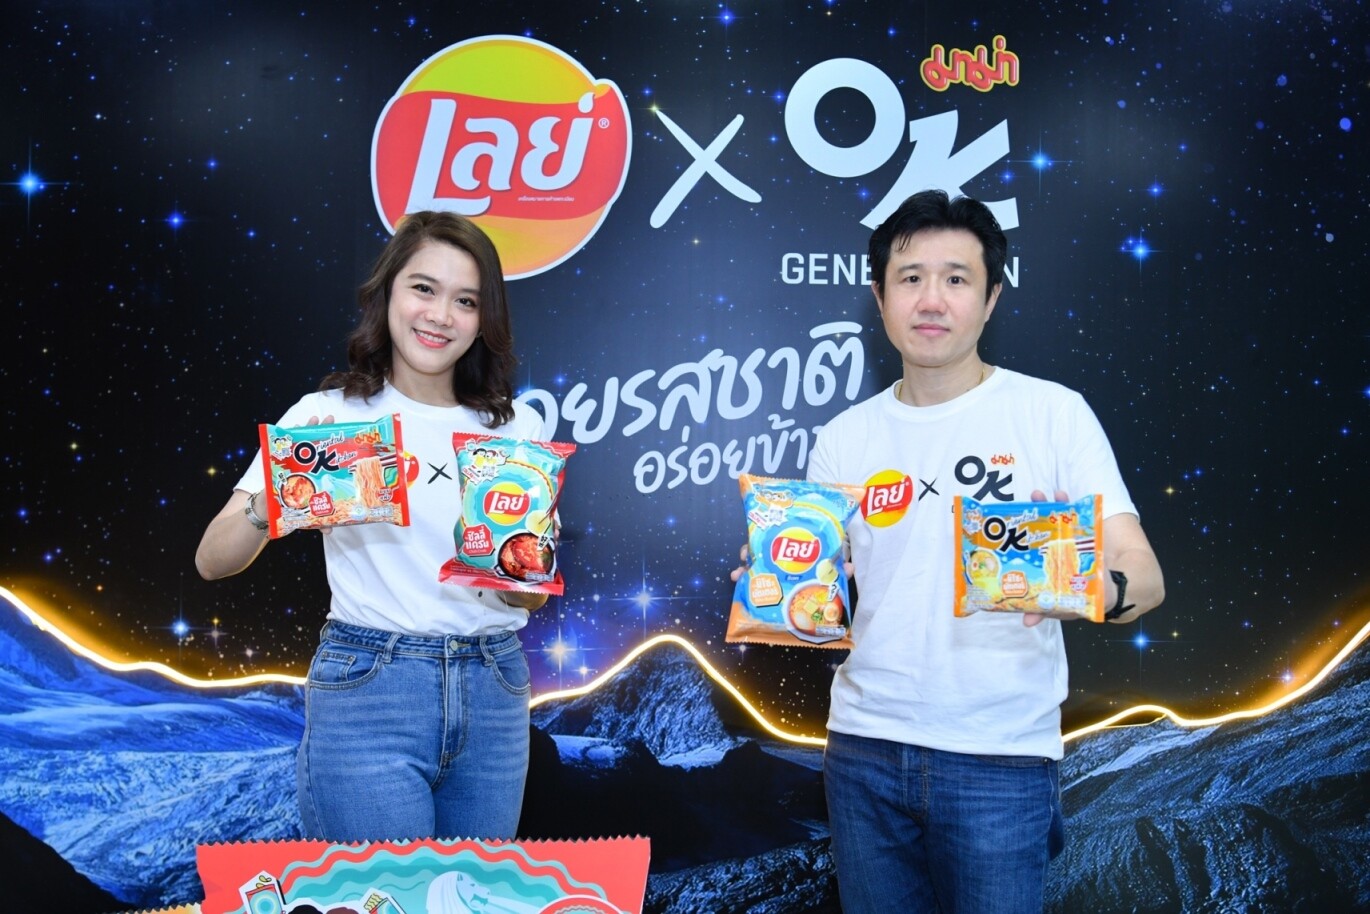 Big Brand of Instant Noodles Collab with Major Potato Chip Brand to Offer the Multiverse of  Yummy Goodness, Launching Two New Flavors "Chili Crab - Miso Butter"